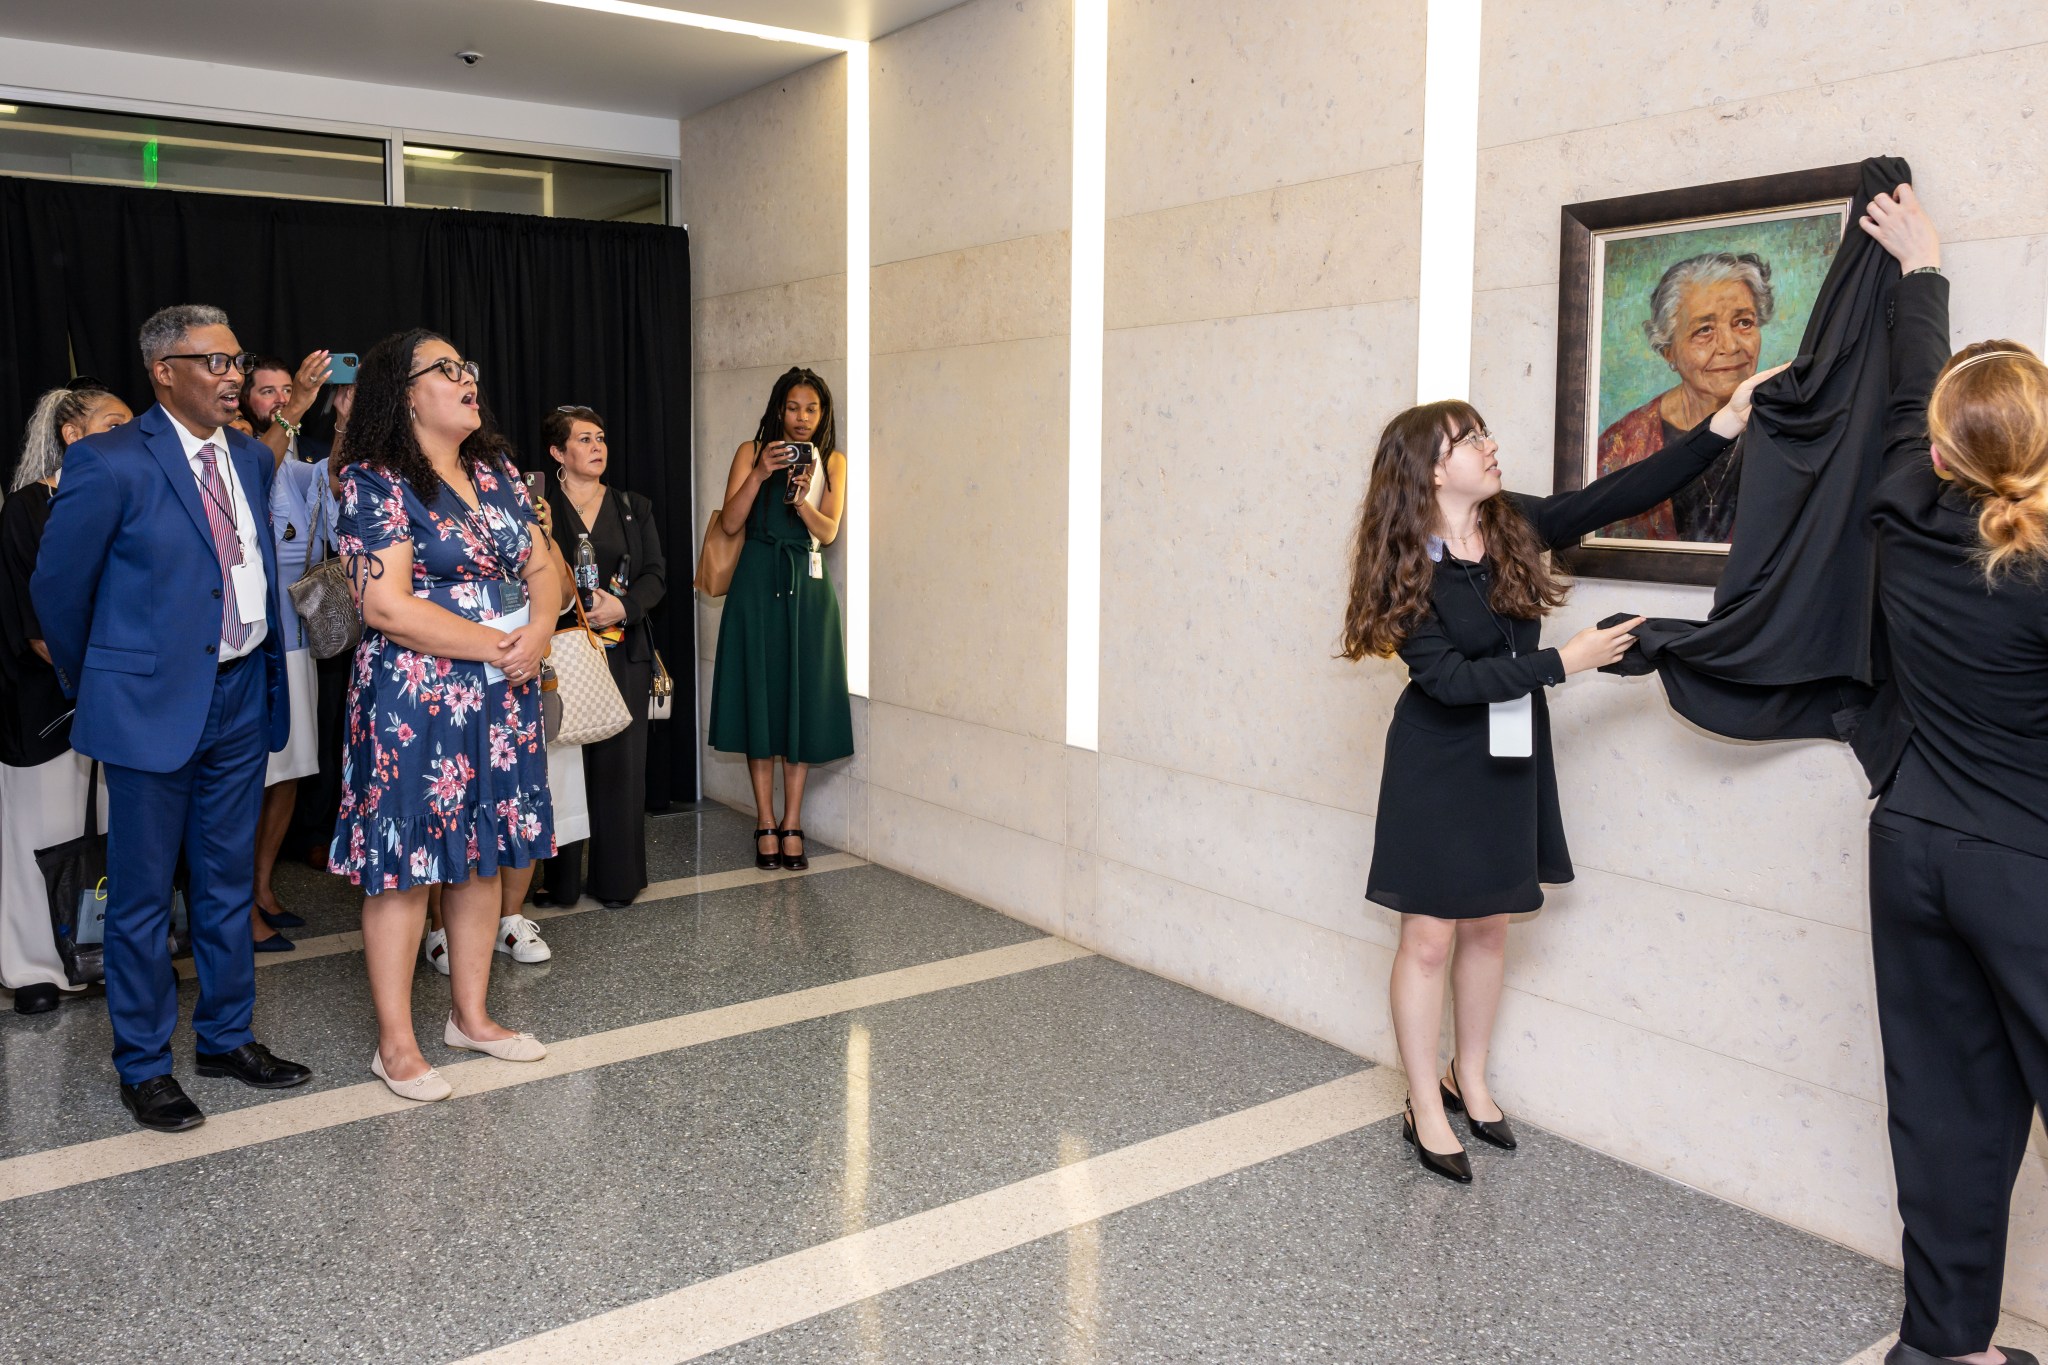 A group of people gather indoors for the unveiling of a portrait. Two women, one young and one older, are removing a black cloth to reveal a framed painting of an elderly woman. The attendees, including a man in a blue suit and a woman in a floral dress, watch the unveiling.